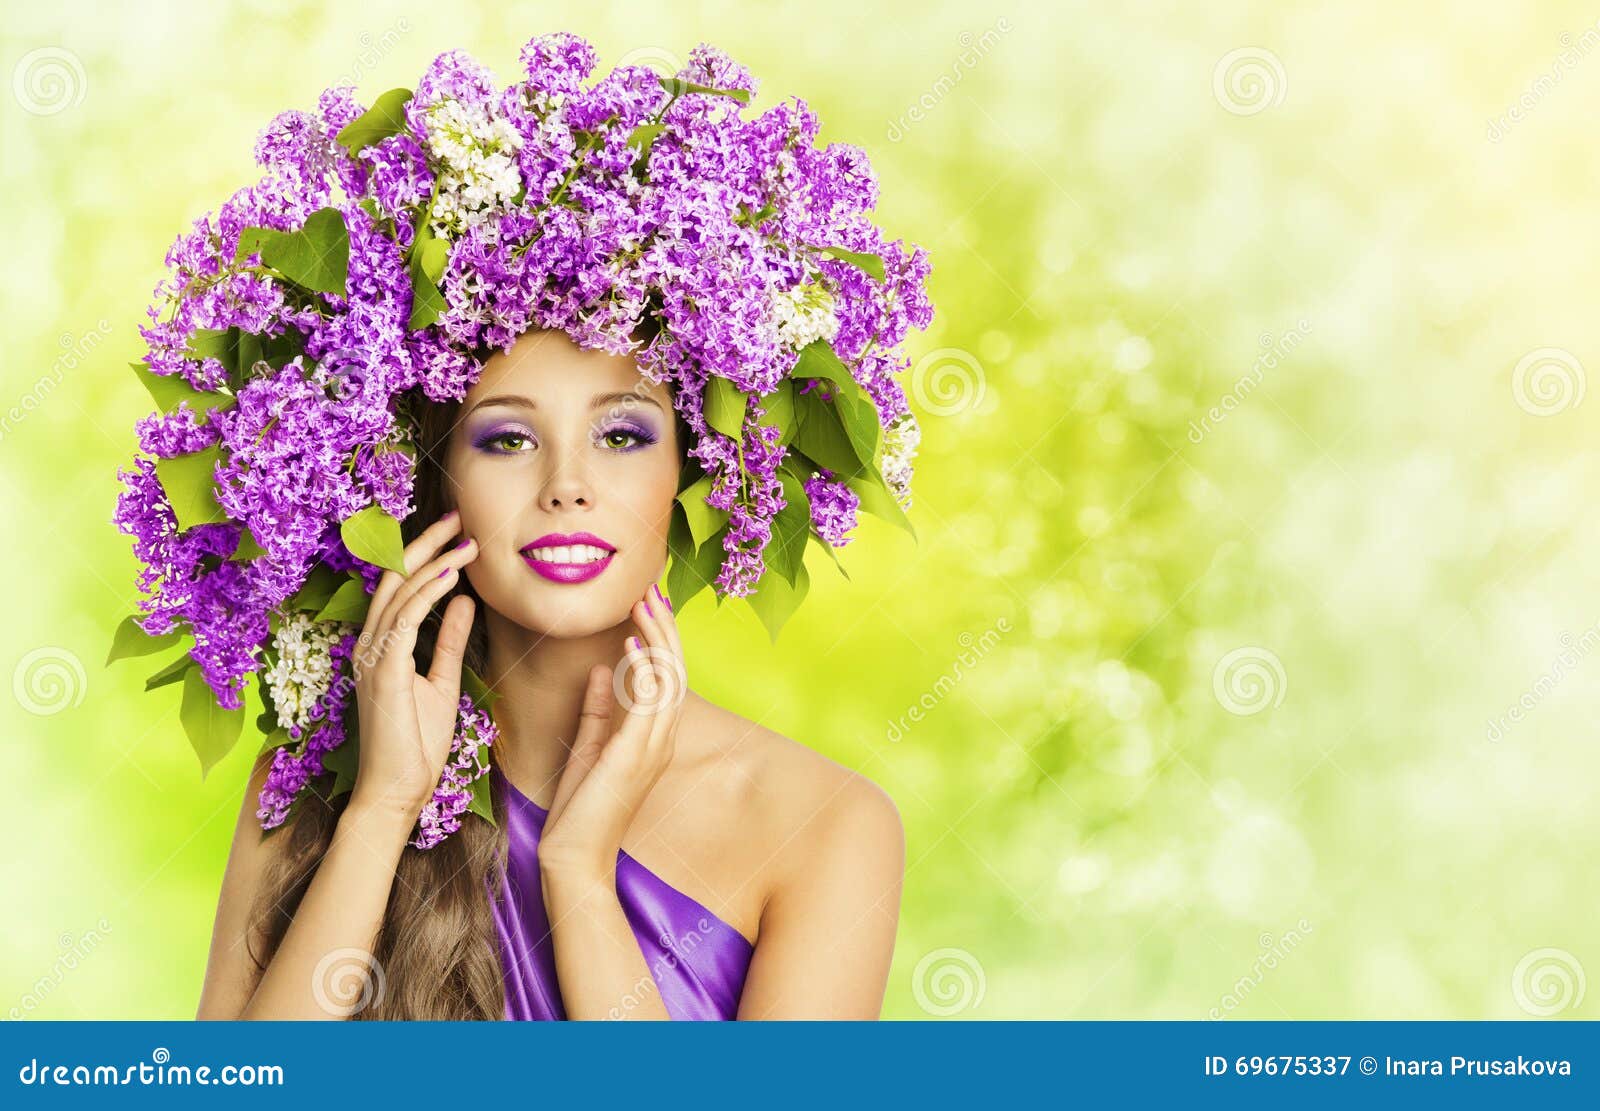 Fashion Model Girl Lilac Flowers Hair Style. Woman Nature Hat Stock Image - Image of crown ...